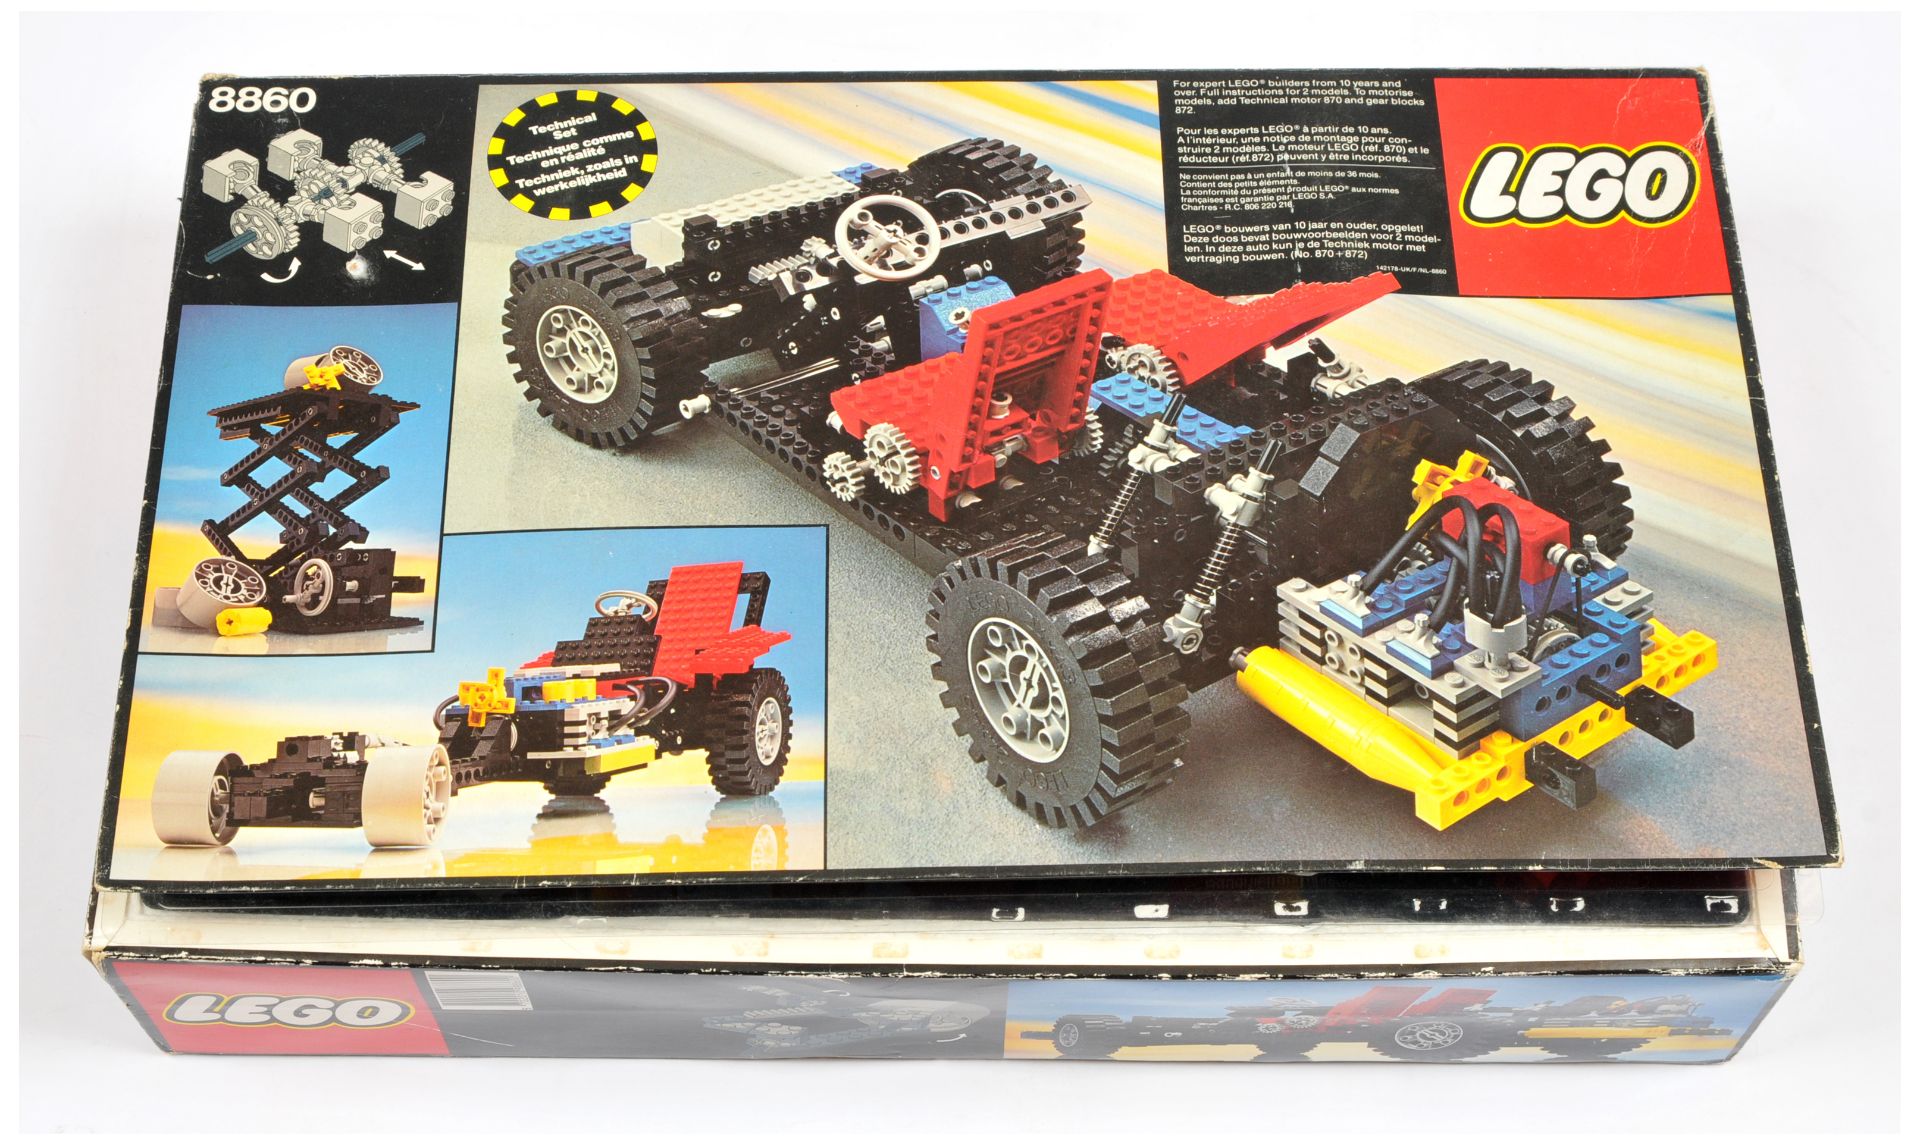 Lego Technic 8860 Expert Builder Car Chassis - with Copied Instructions - Fair to Good, parts are...